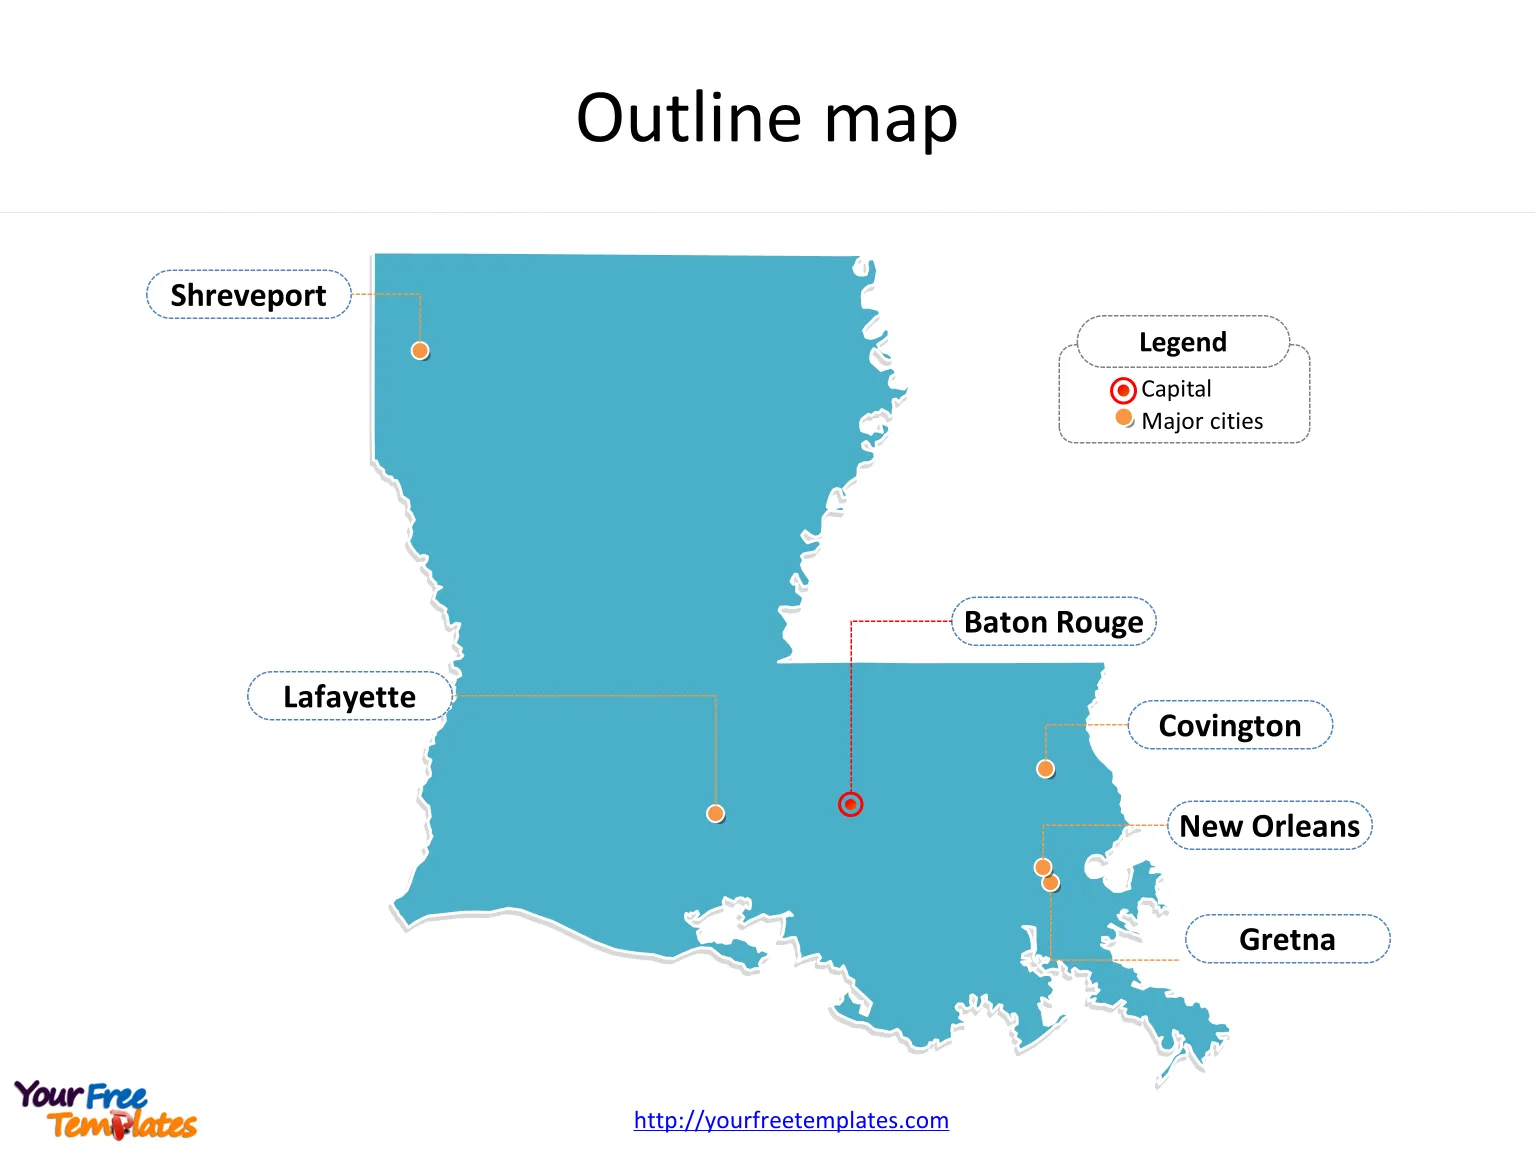 State of Louisiana map with most populated parishes labeled on the Louisiana maps PowerPoint templates